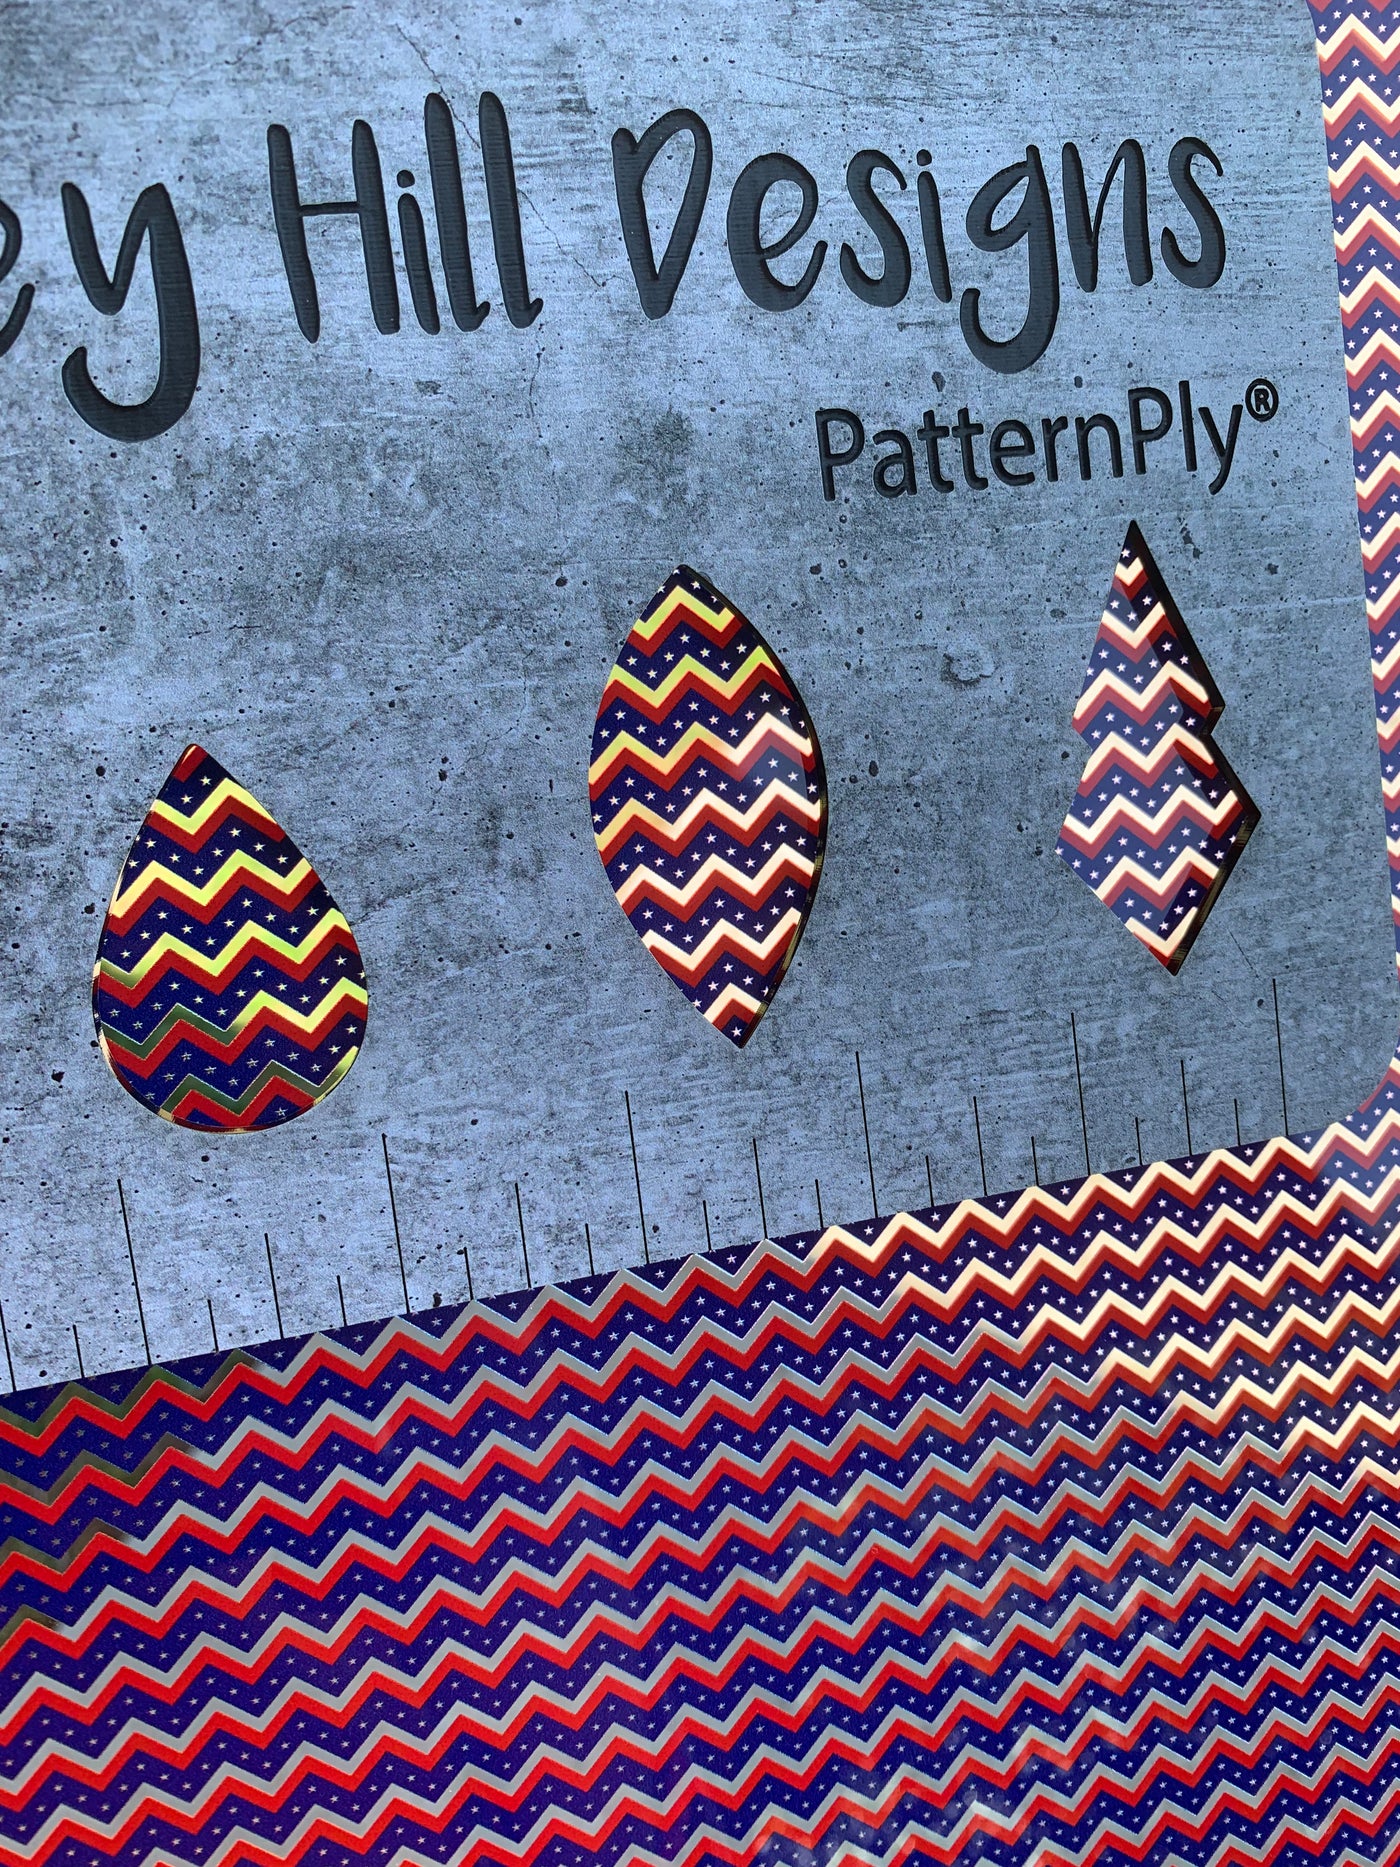 PatternPly® Scattered Micro Chevron Stars and Stripes